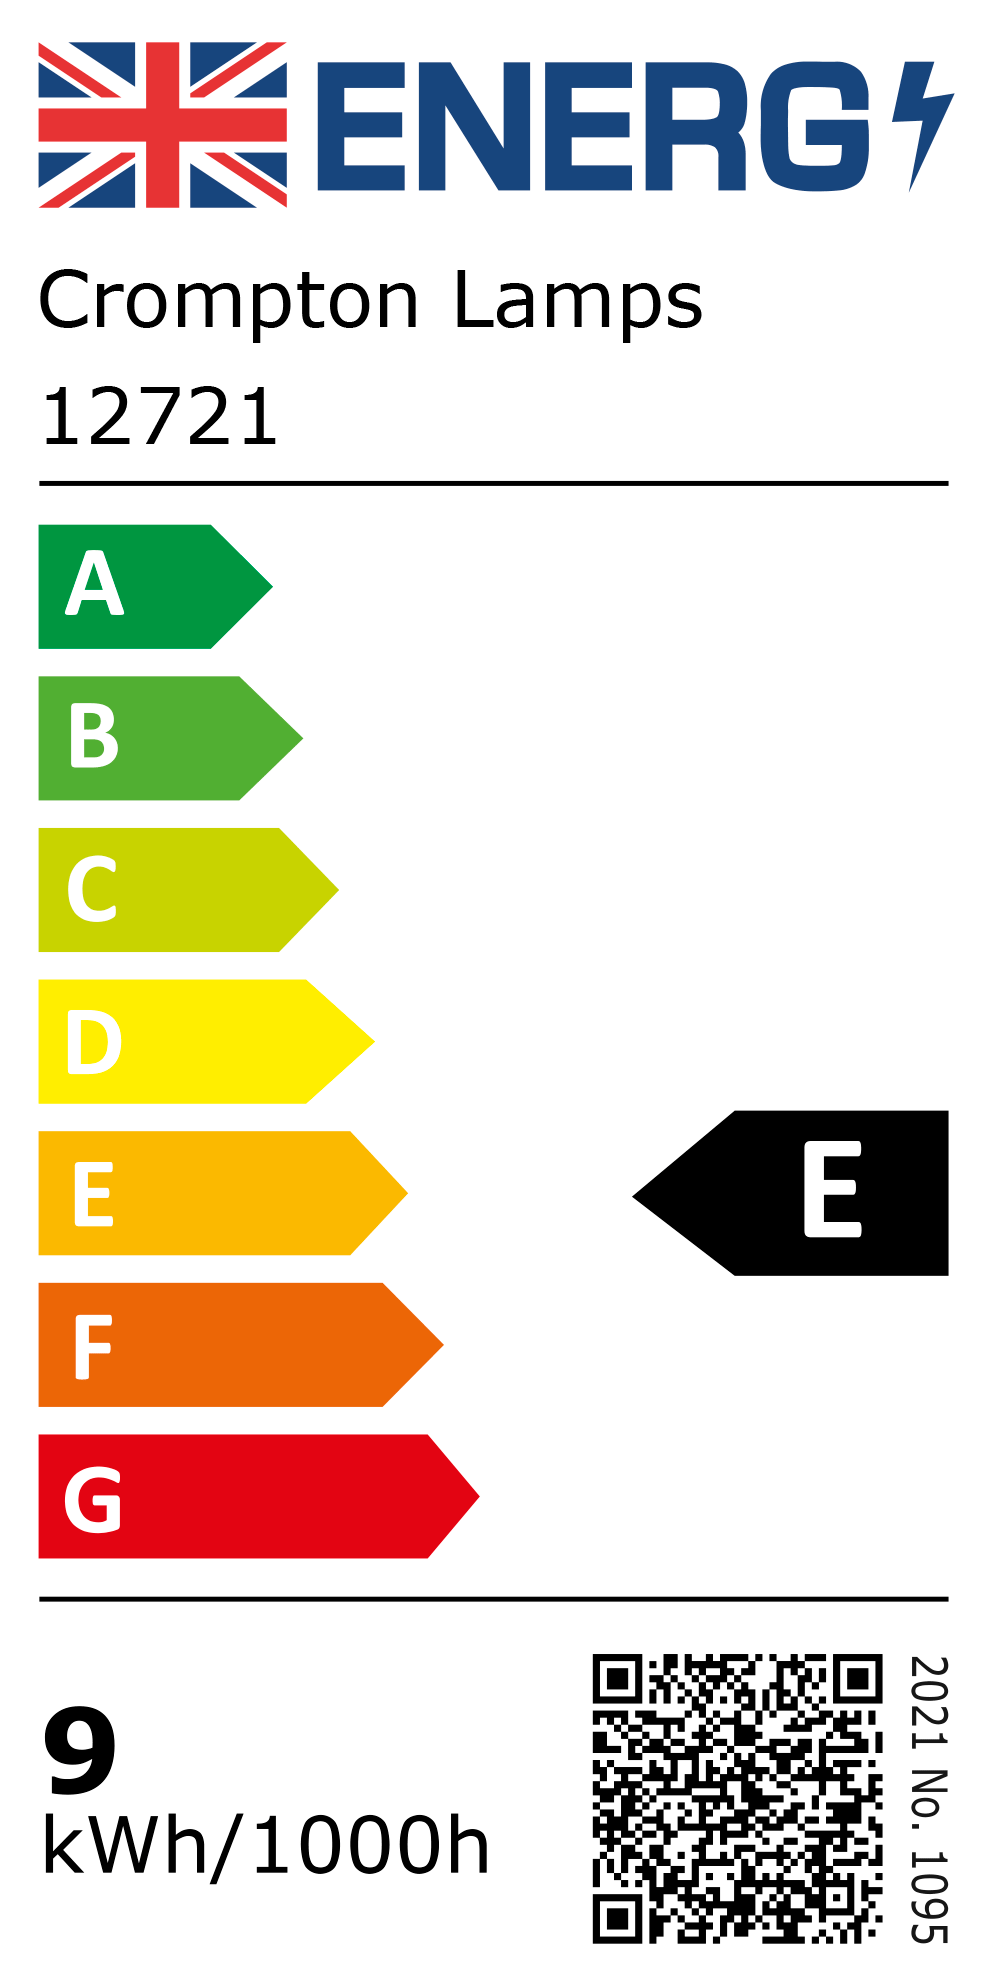 New 2021 Energy Rating Label: Stock Code 12721